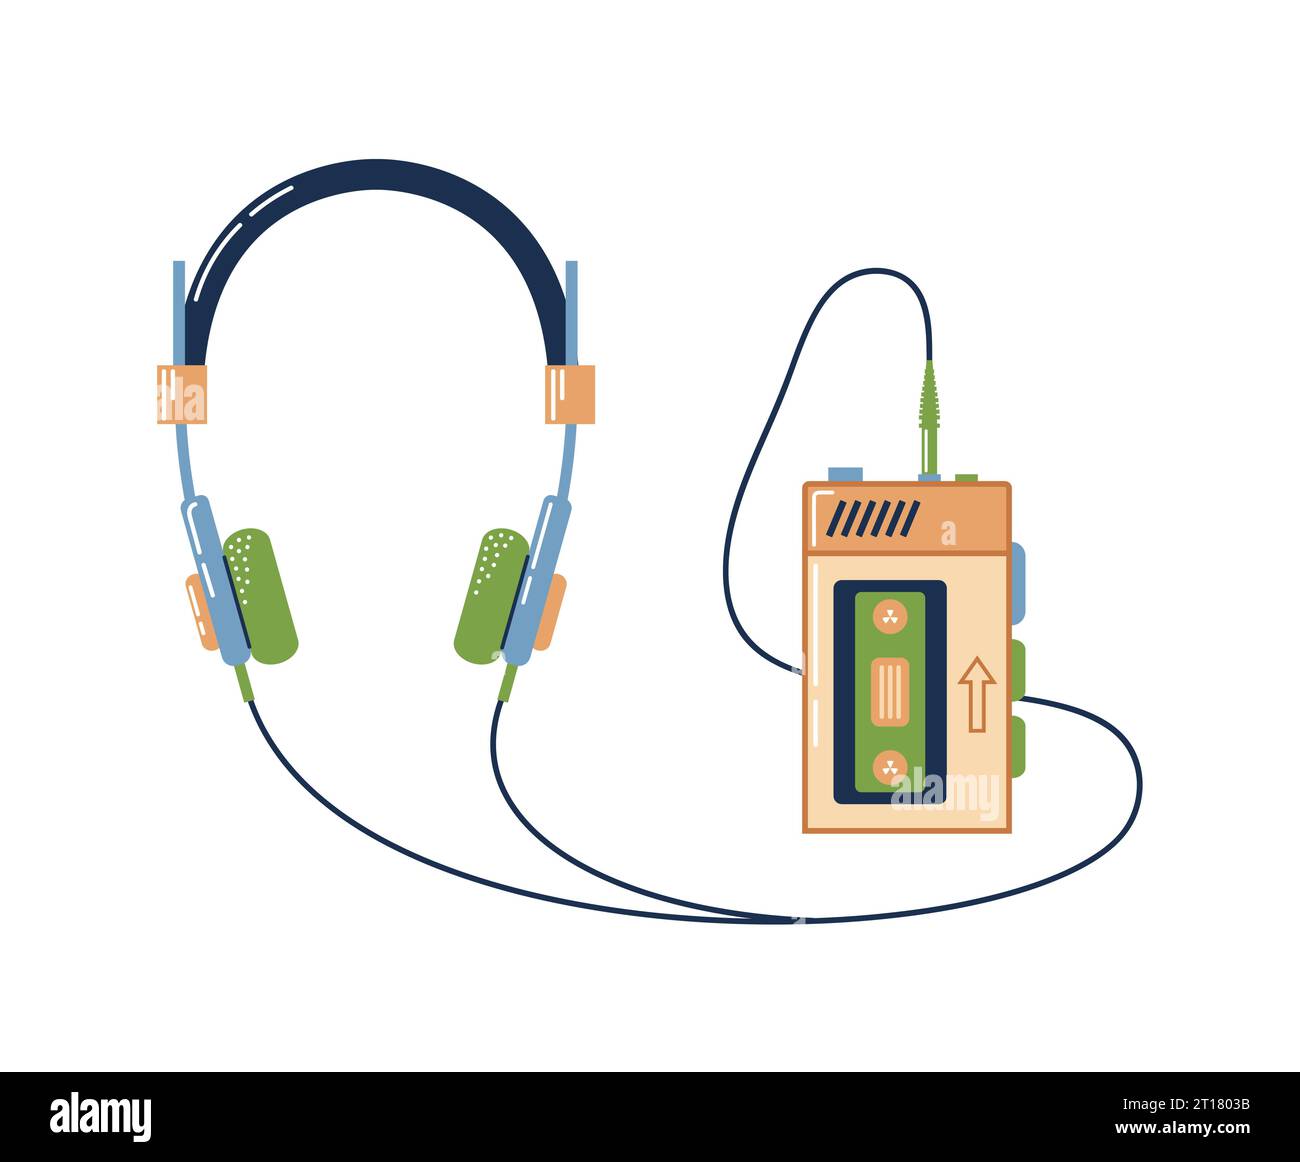 Vintage cassette portable audio player with headphones. 90s music. Retro style illustration. In earth tones. For stickers, posters, postcards, design Stock Vector